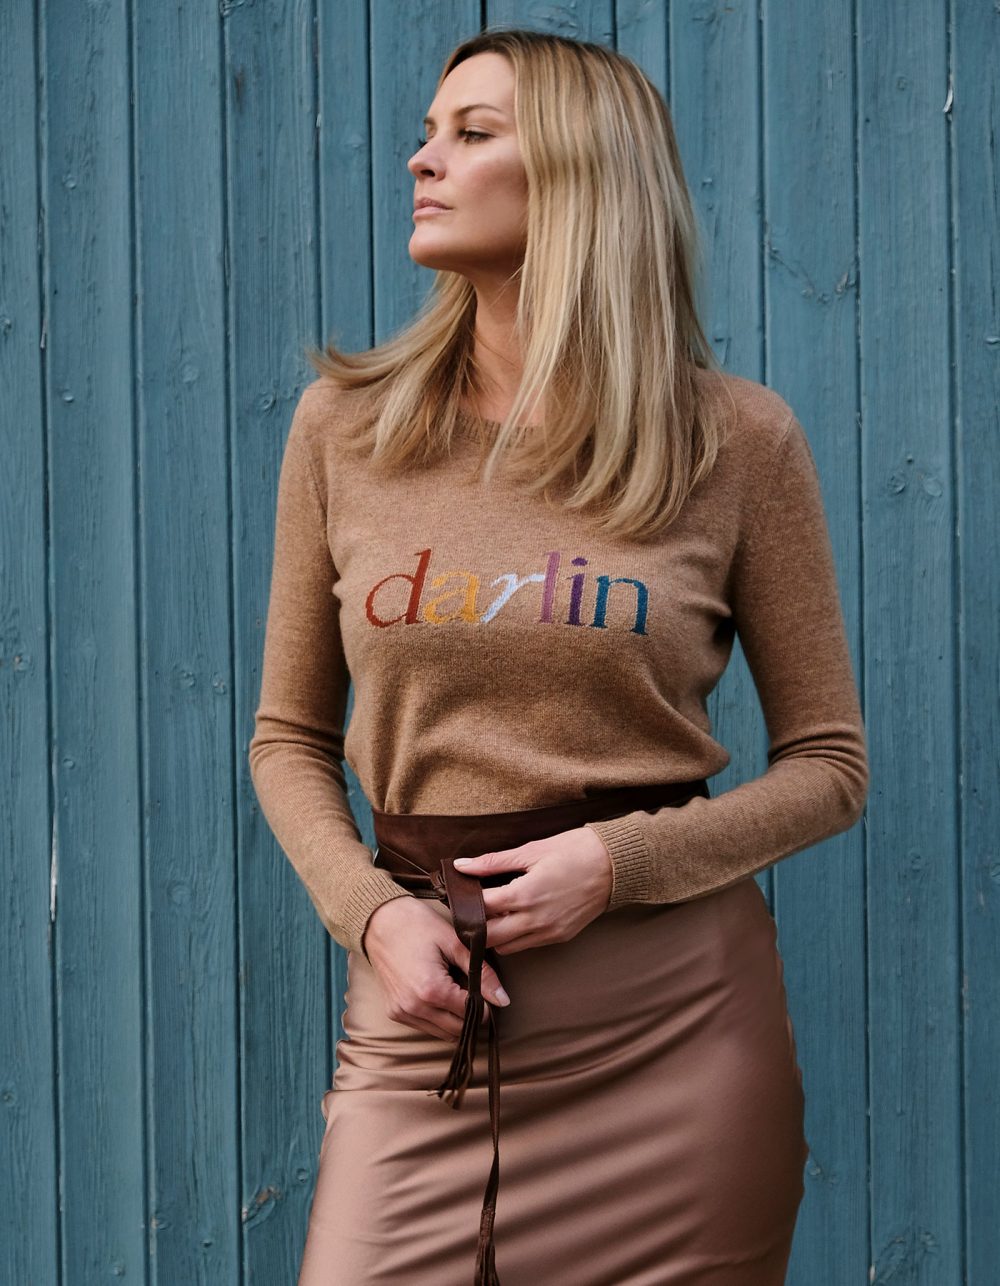 Model in the Darlin Beige cashmere jumper against a wood panel background to show sustainable womens cashmere.